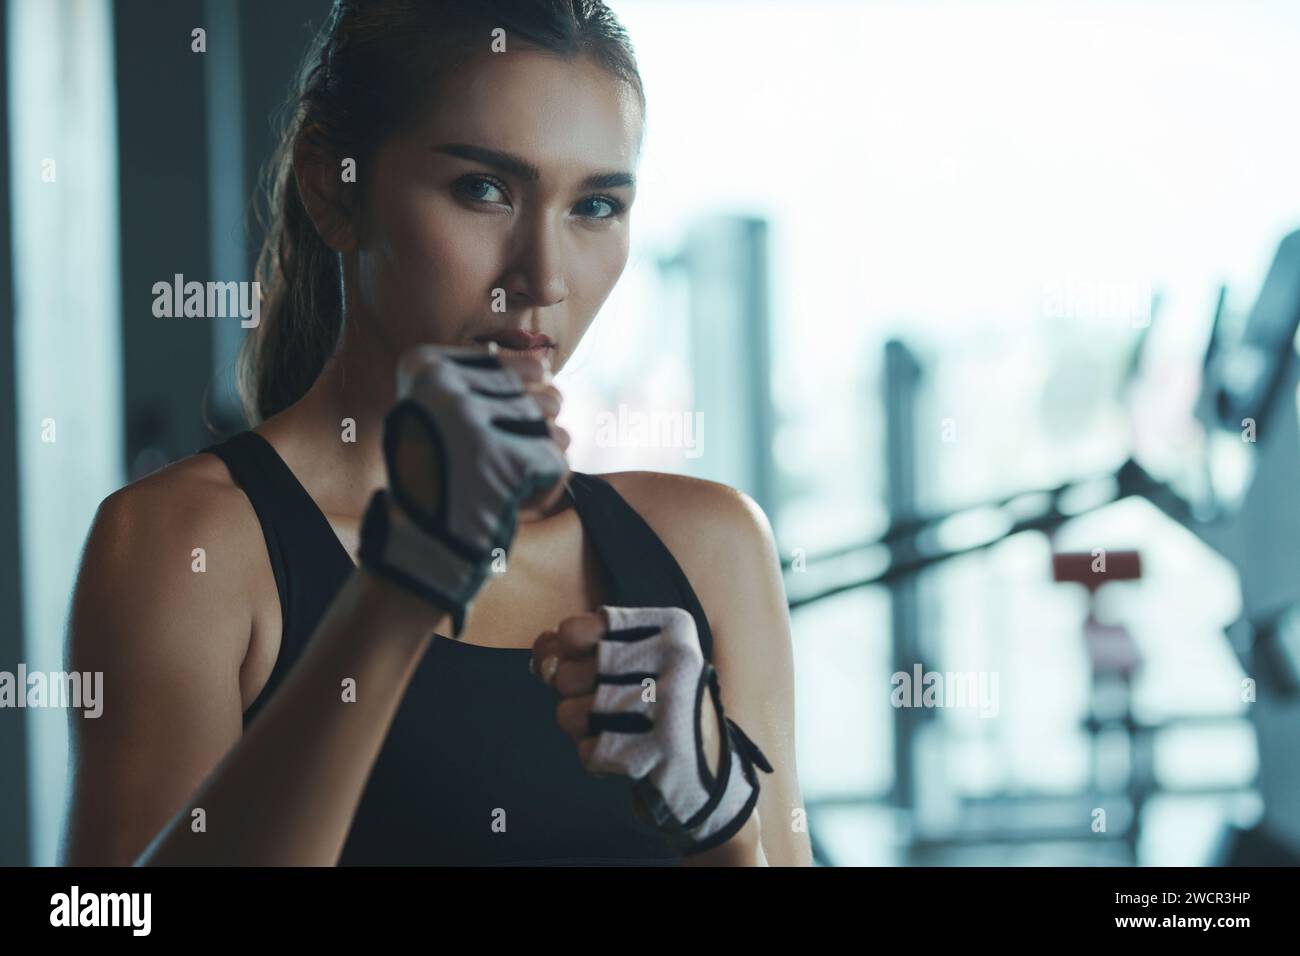 Sporty woman wearing boxing gloves poses in fighting position looking at camera. Stock Photo